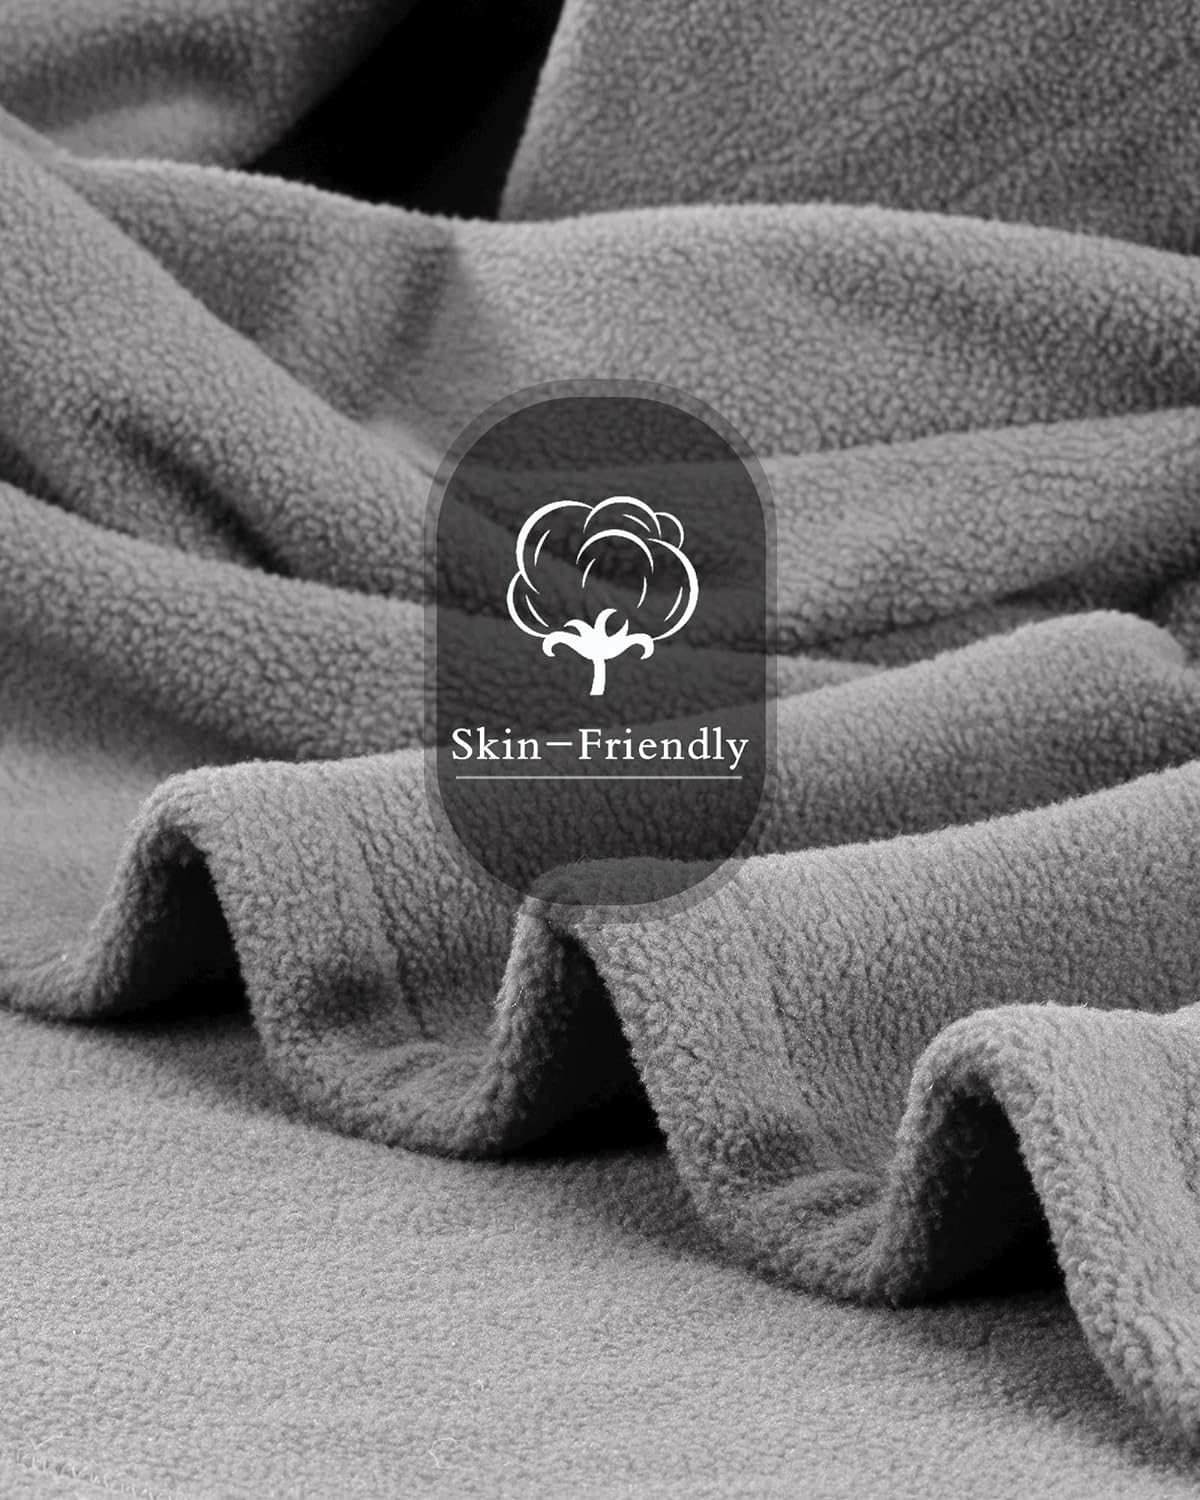 Electric Heated Blanket 72"x84" Full Size Warm Heating Blanket for Whole Body, 4 Heating Levels and 10 Hours Auto-Off Overheating Protection, Grey